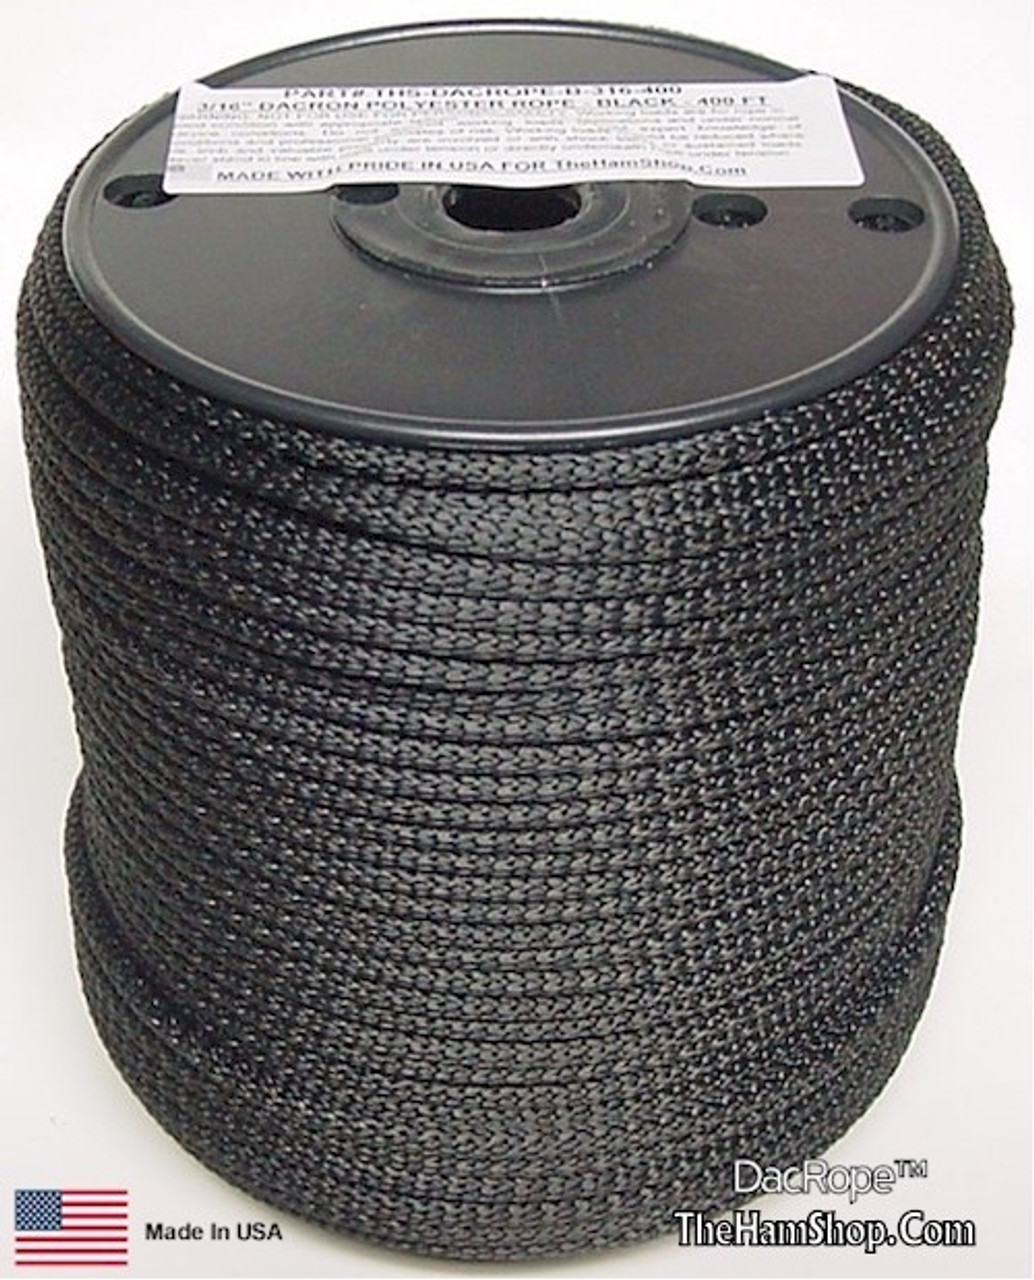 Antenna Support Rope, 3/16" 400', Black, Round, 100% Dacron Polyester Rope